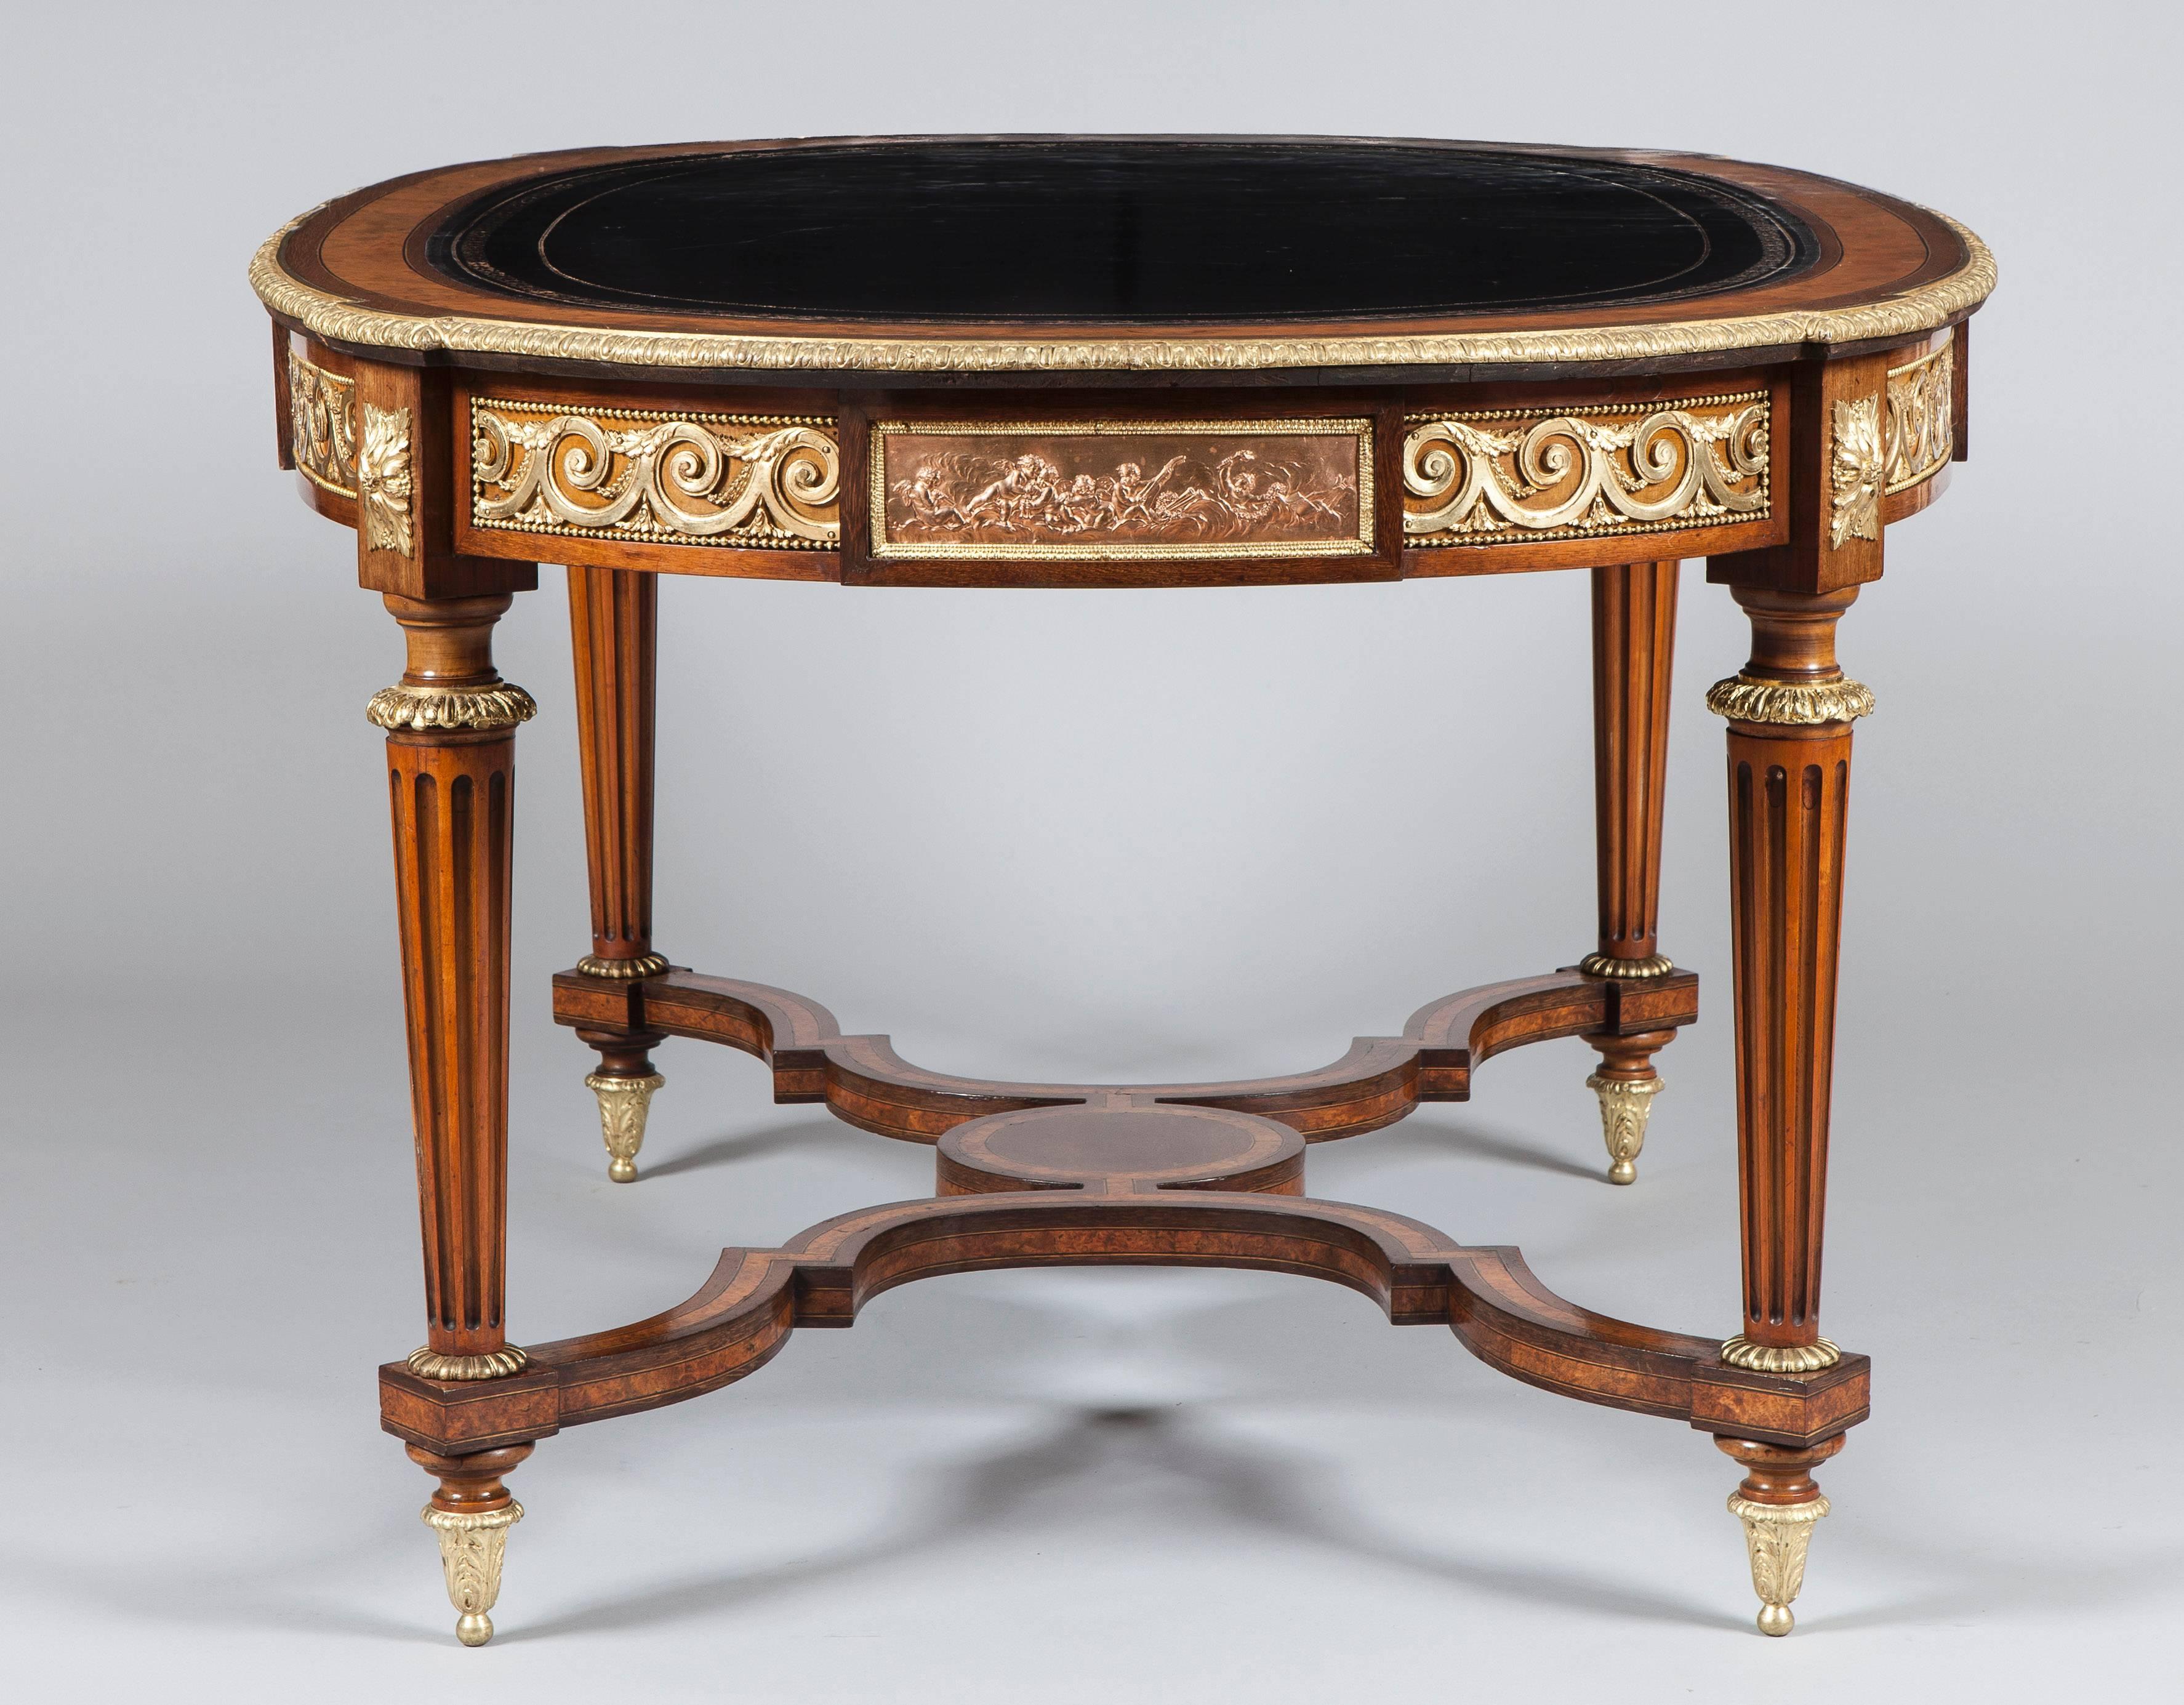 A Library Centre Table in the Louis XVI Manner

Constructed in amboyna, with purpleheart banding with gilt bronze mounts; of elliptical form, with gently everted angles; rising from circular bronze collared fluted legs capped with gilt bronze toupie